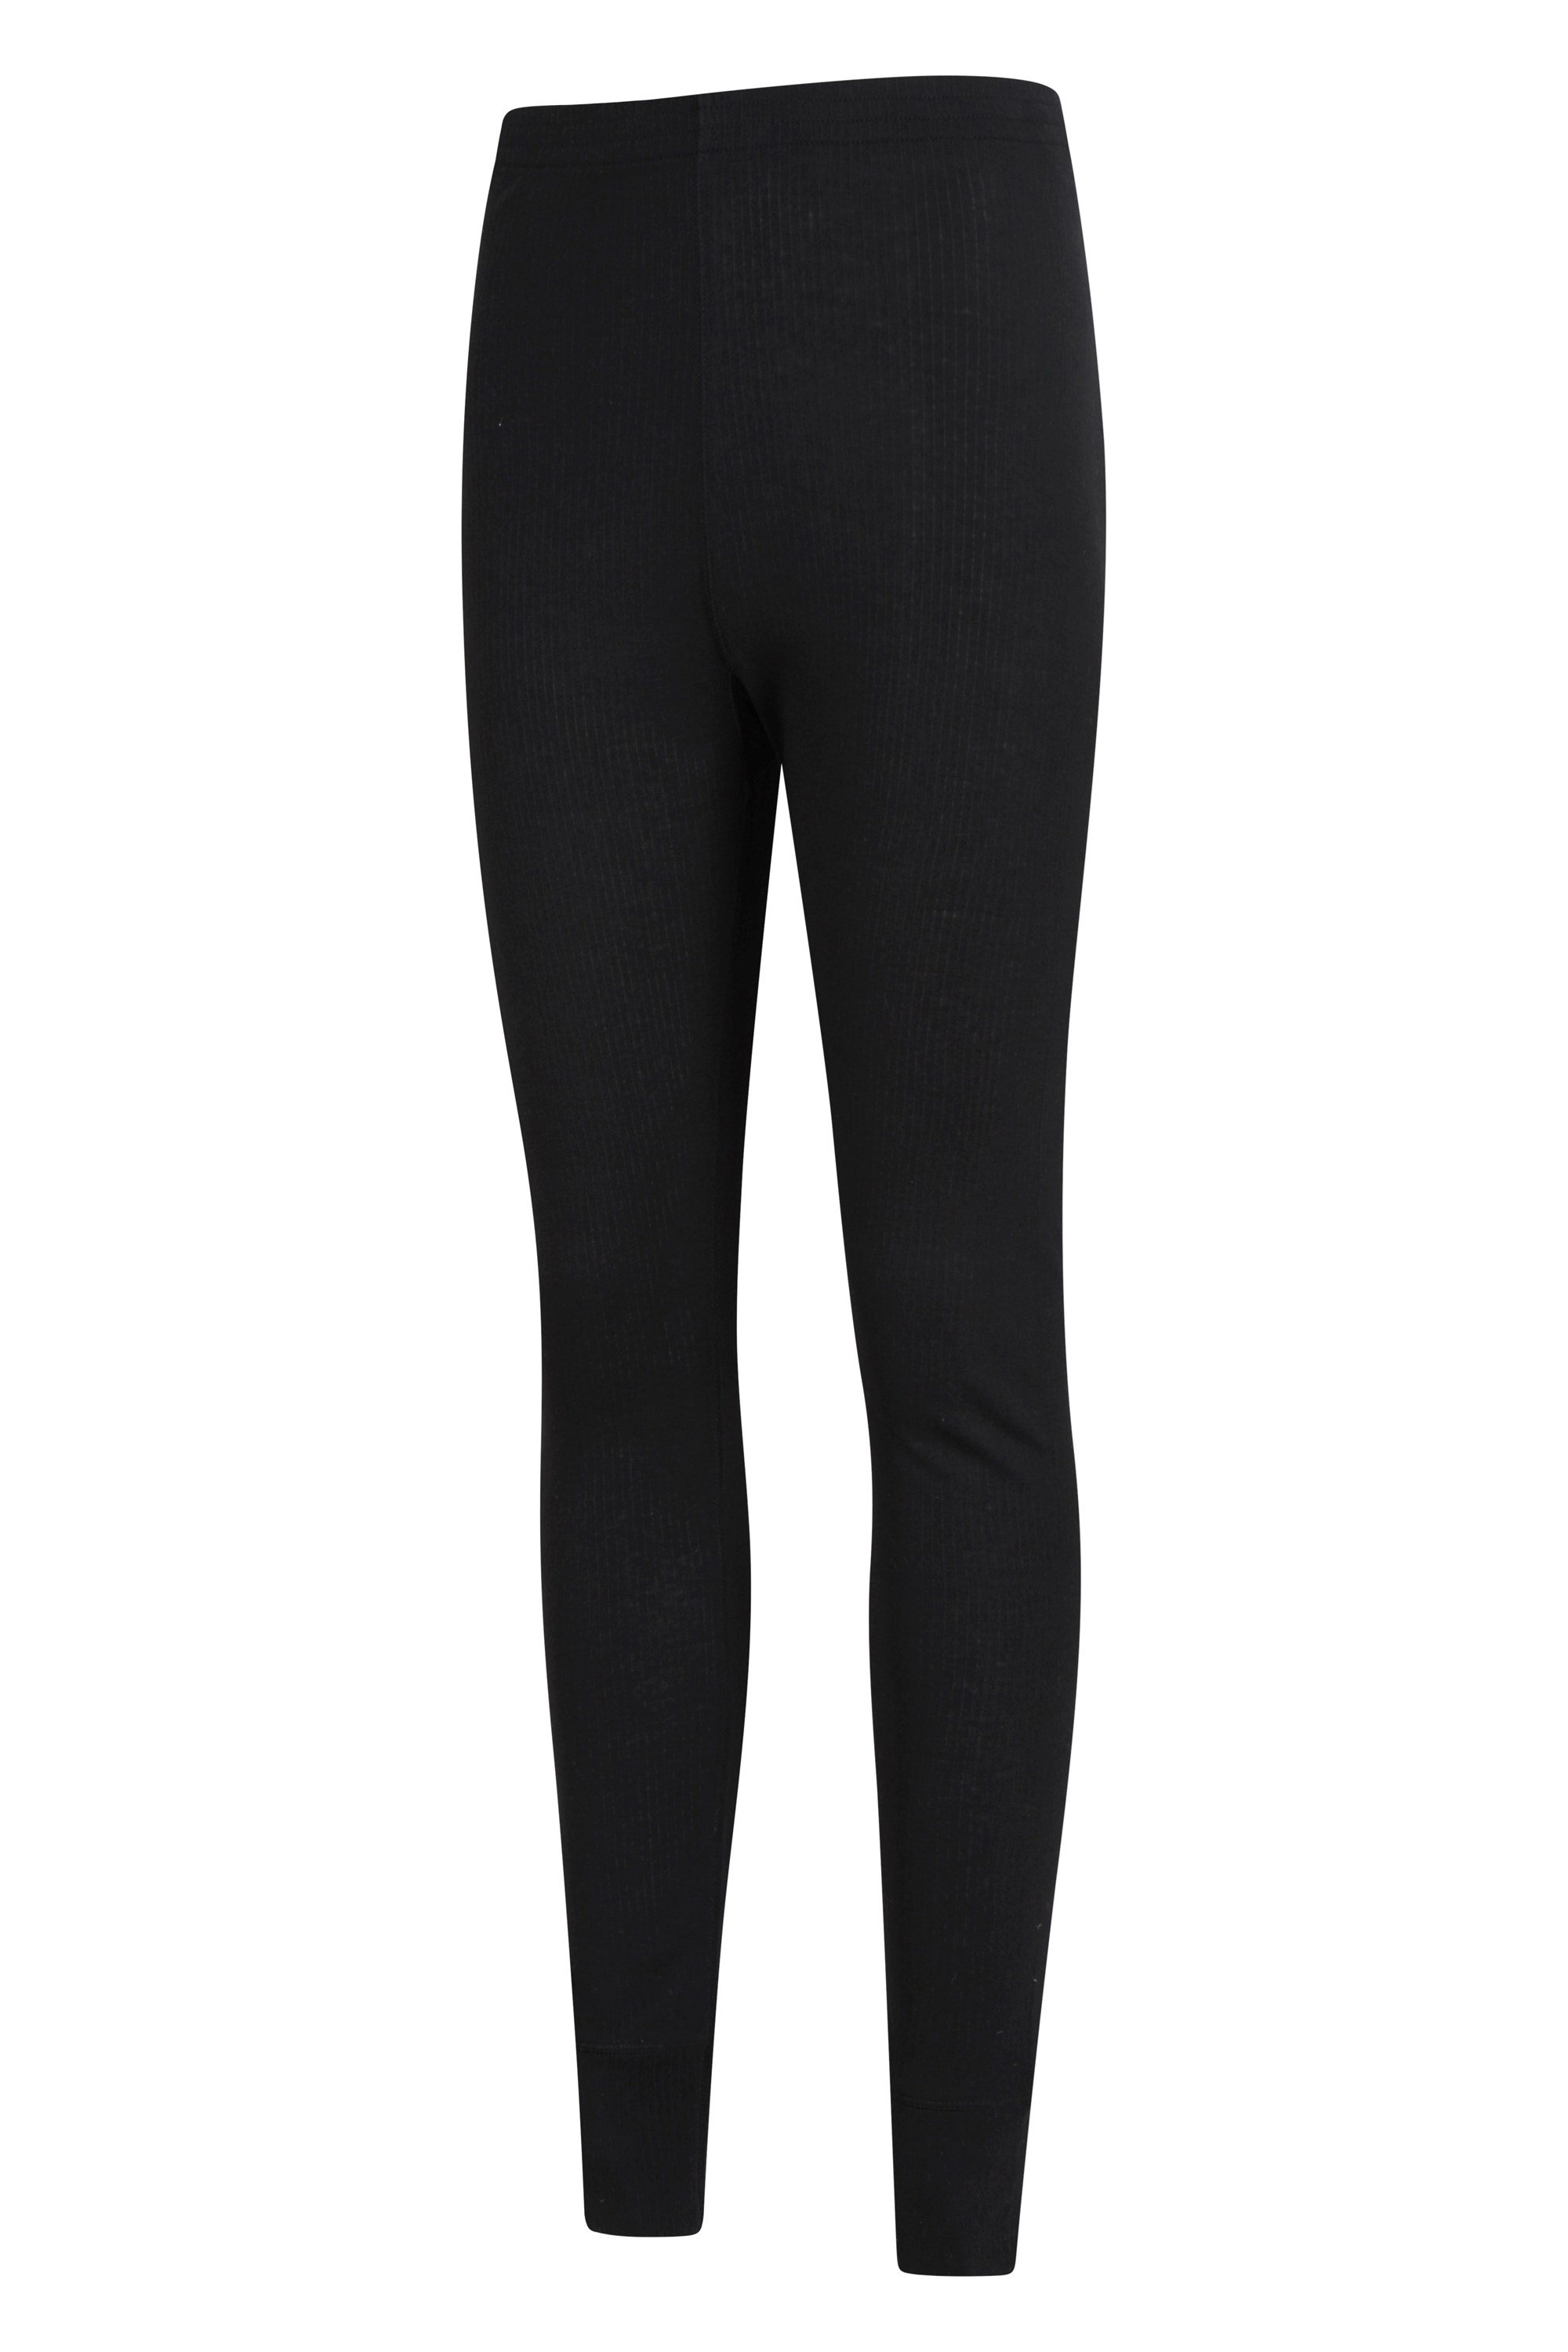 Buy Mountain Warehouse Pink Womens Talus Thermal Leggings from Next Poland